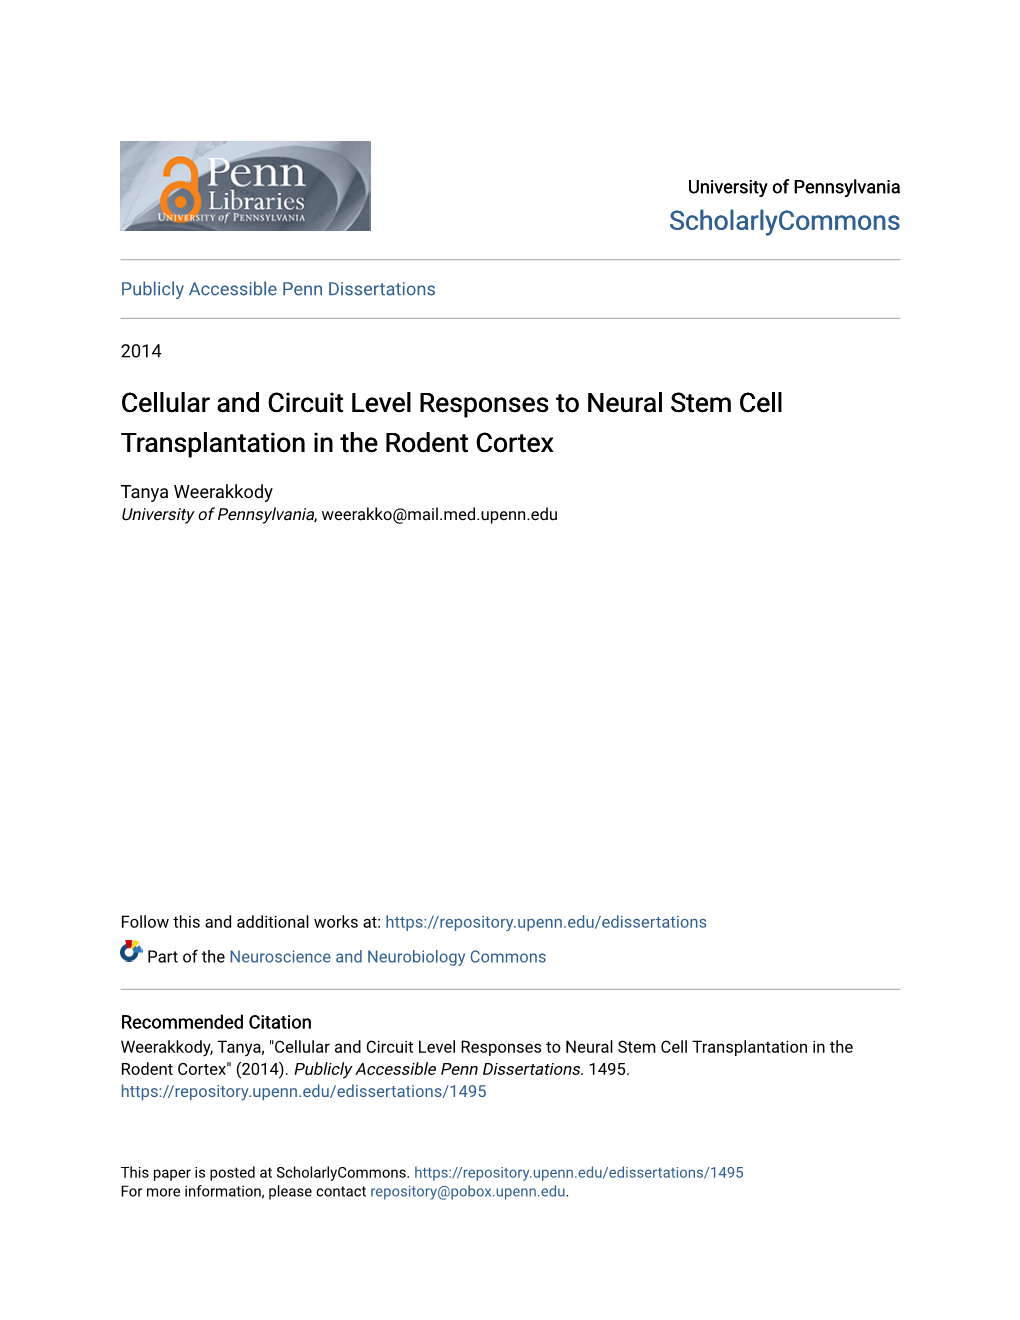 Cellular and Circuit Level Responses to Neural Stem Cell Transplantation in the Rodent Cortex